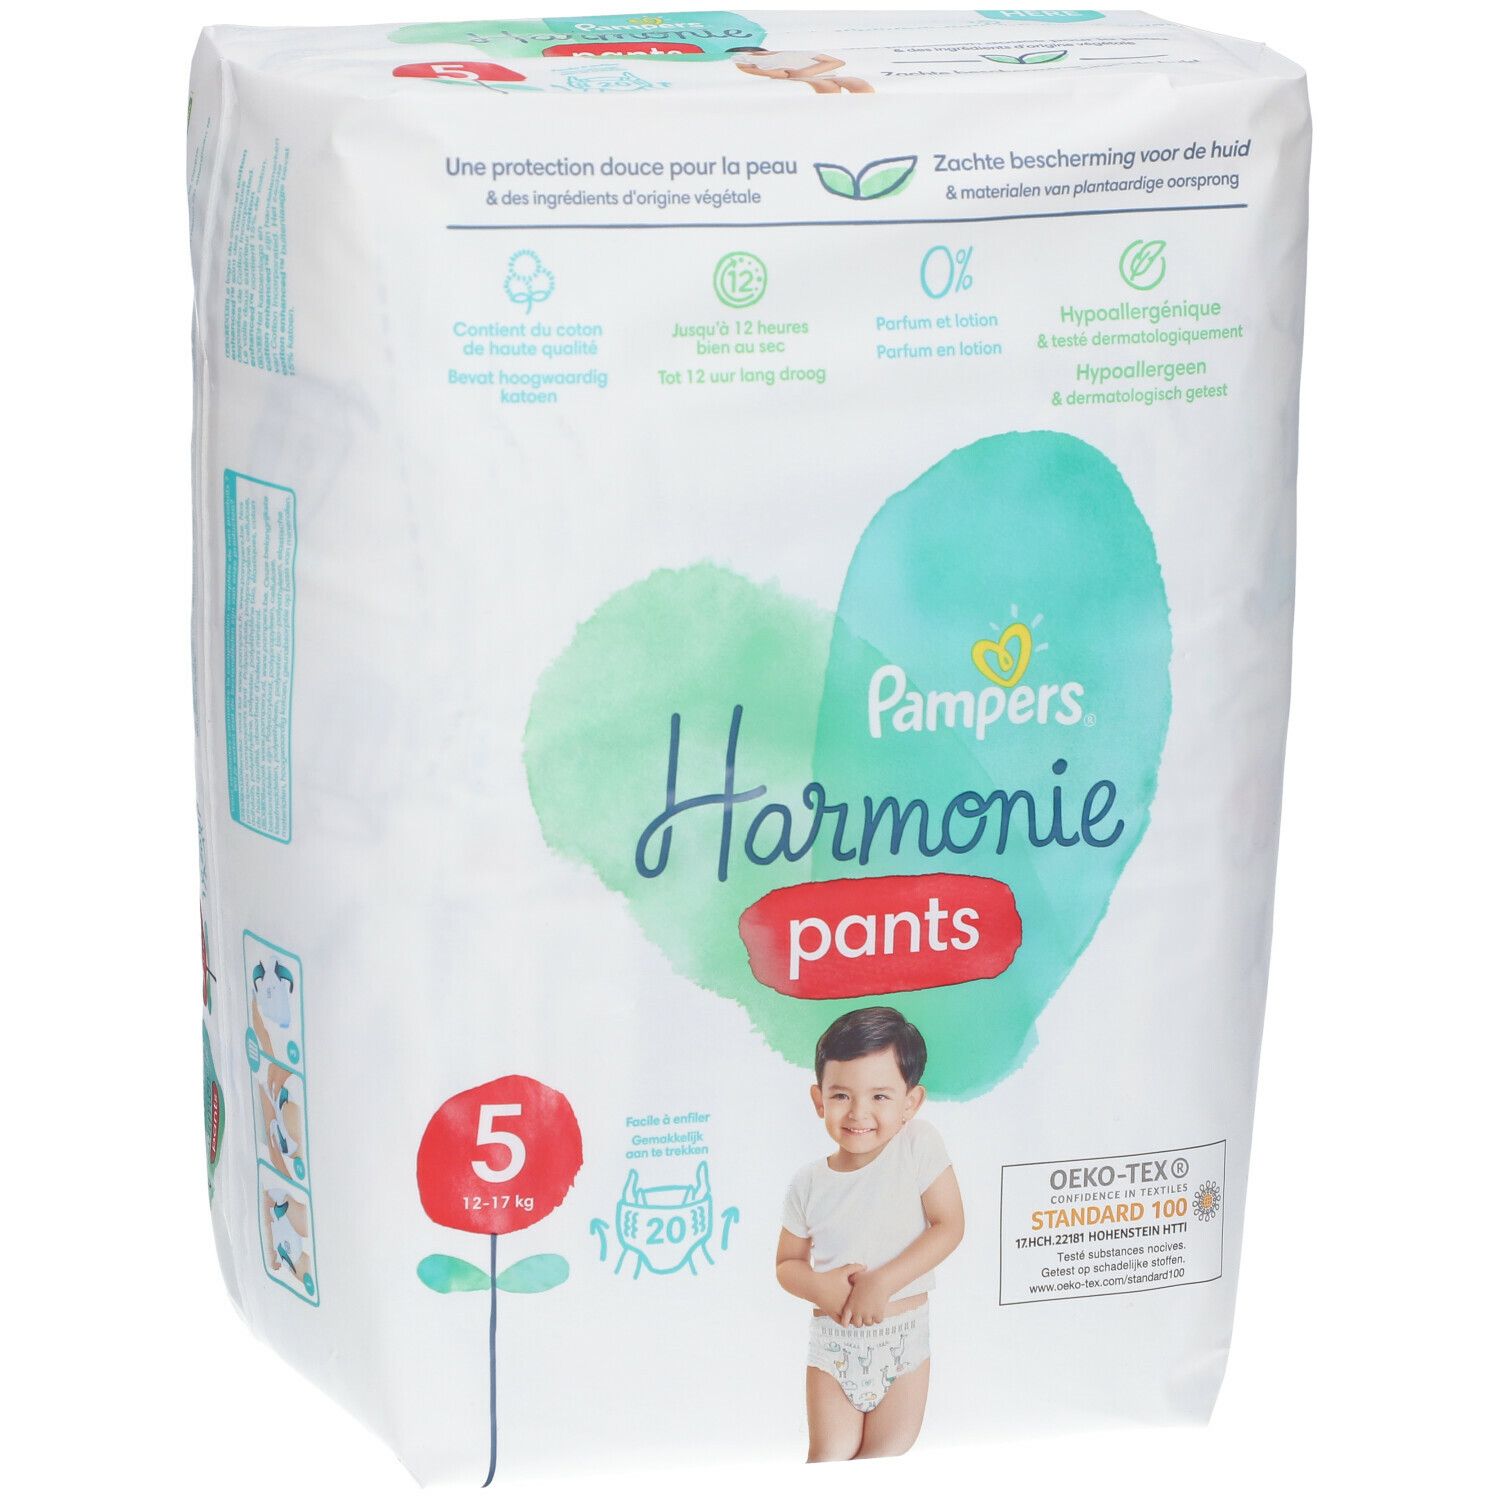 Pampers Harmonie Pants Couches-Culottes Taille 5, 20 Culottes